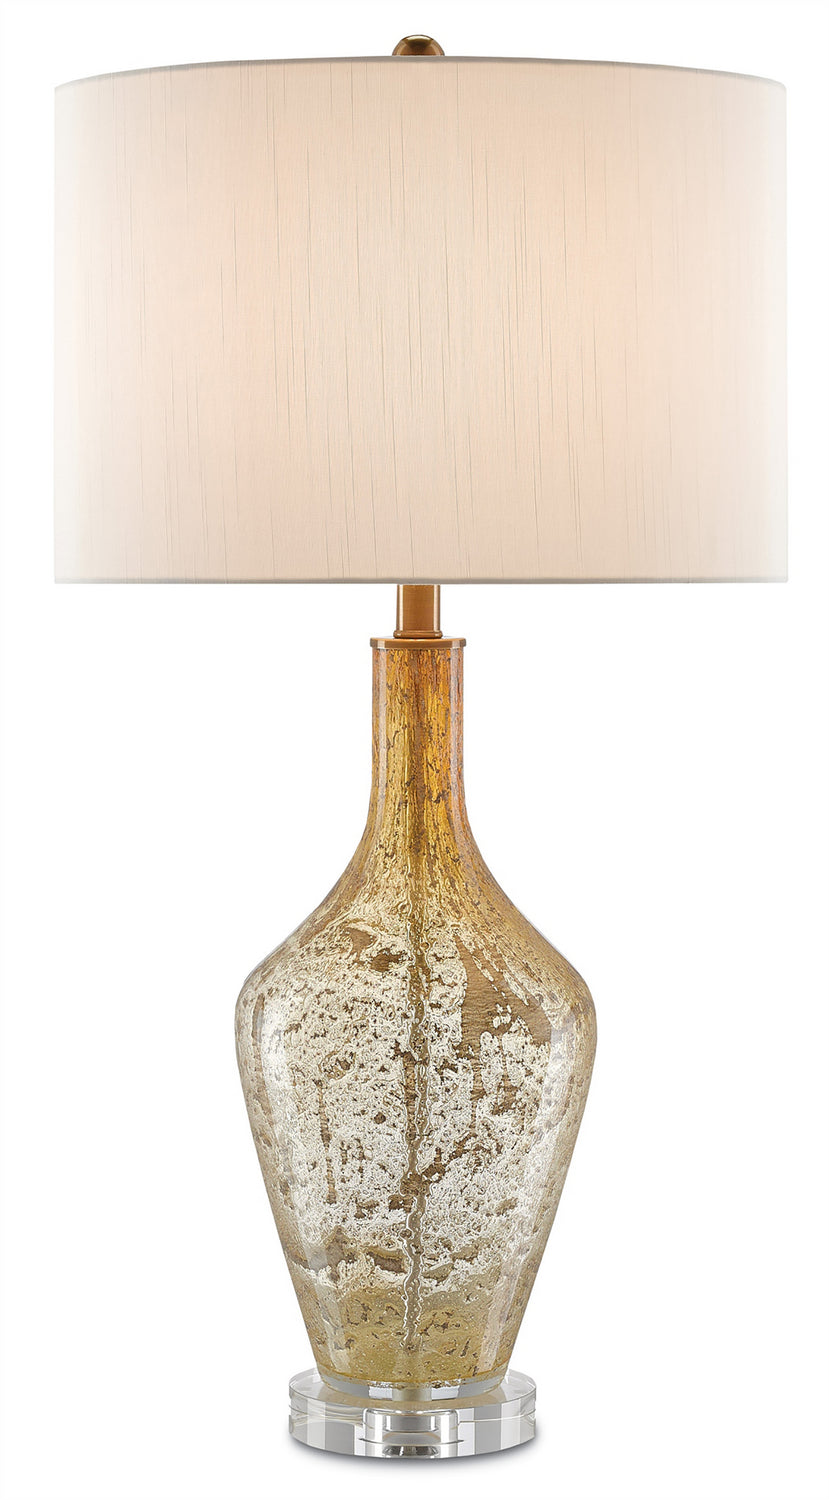 One Light Table Lamp from the Habib collection in Champagne Speckle finish